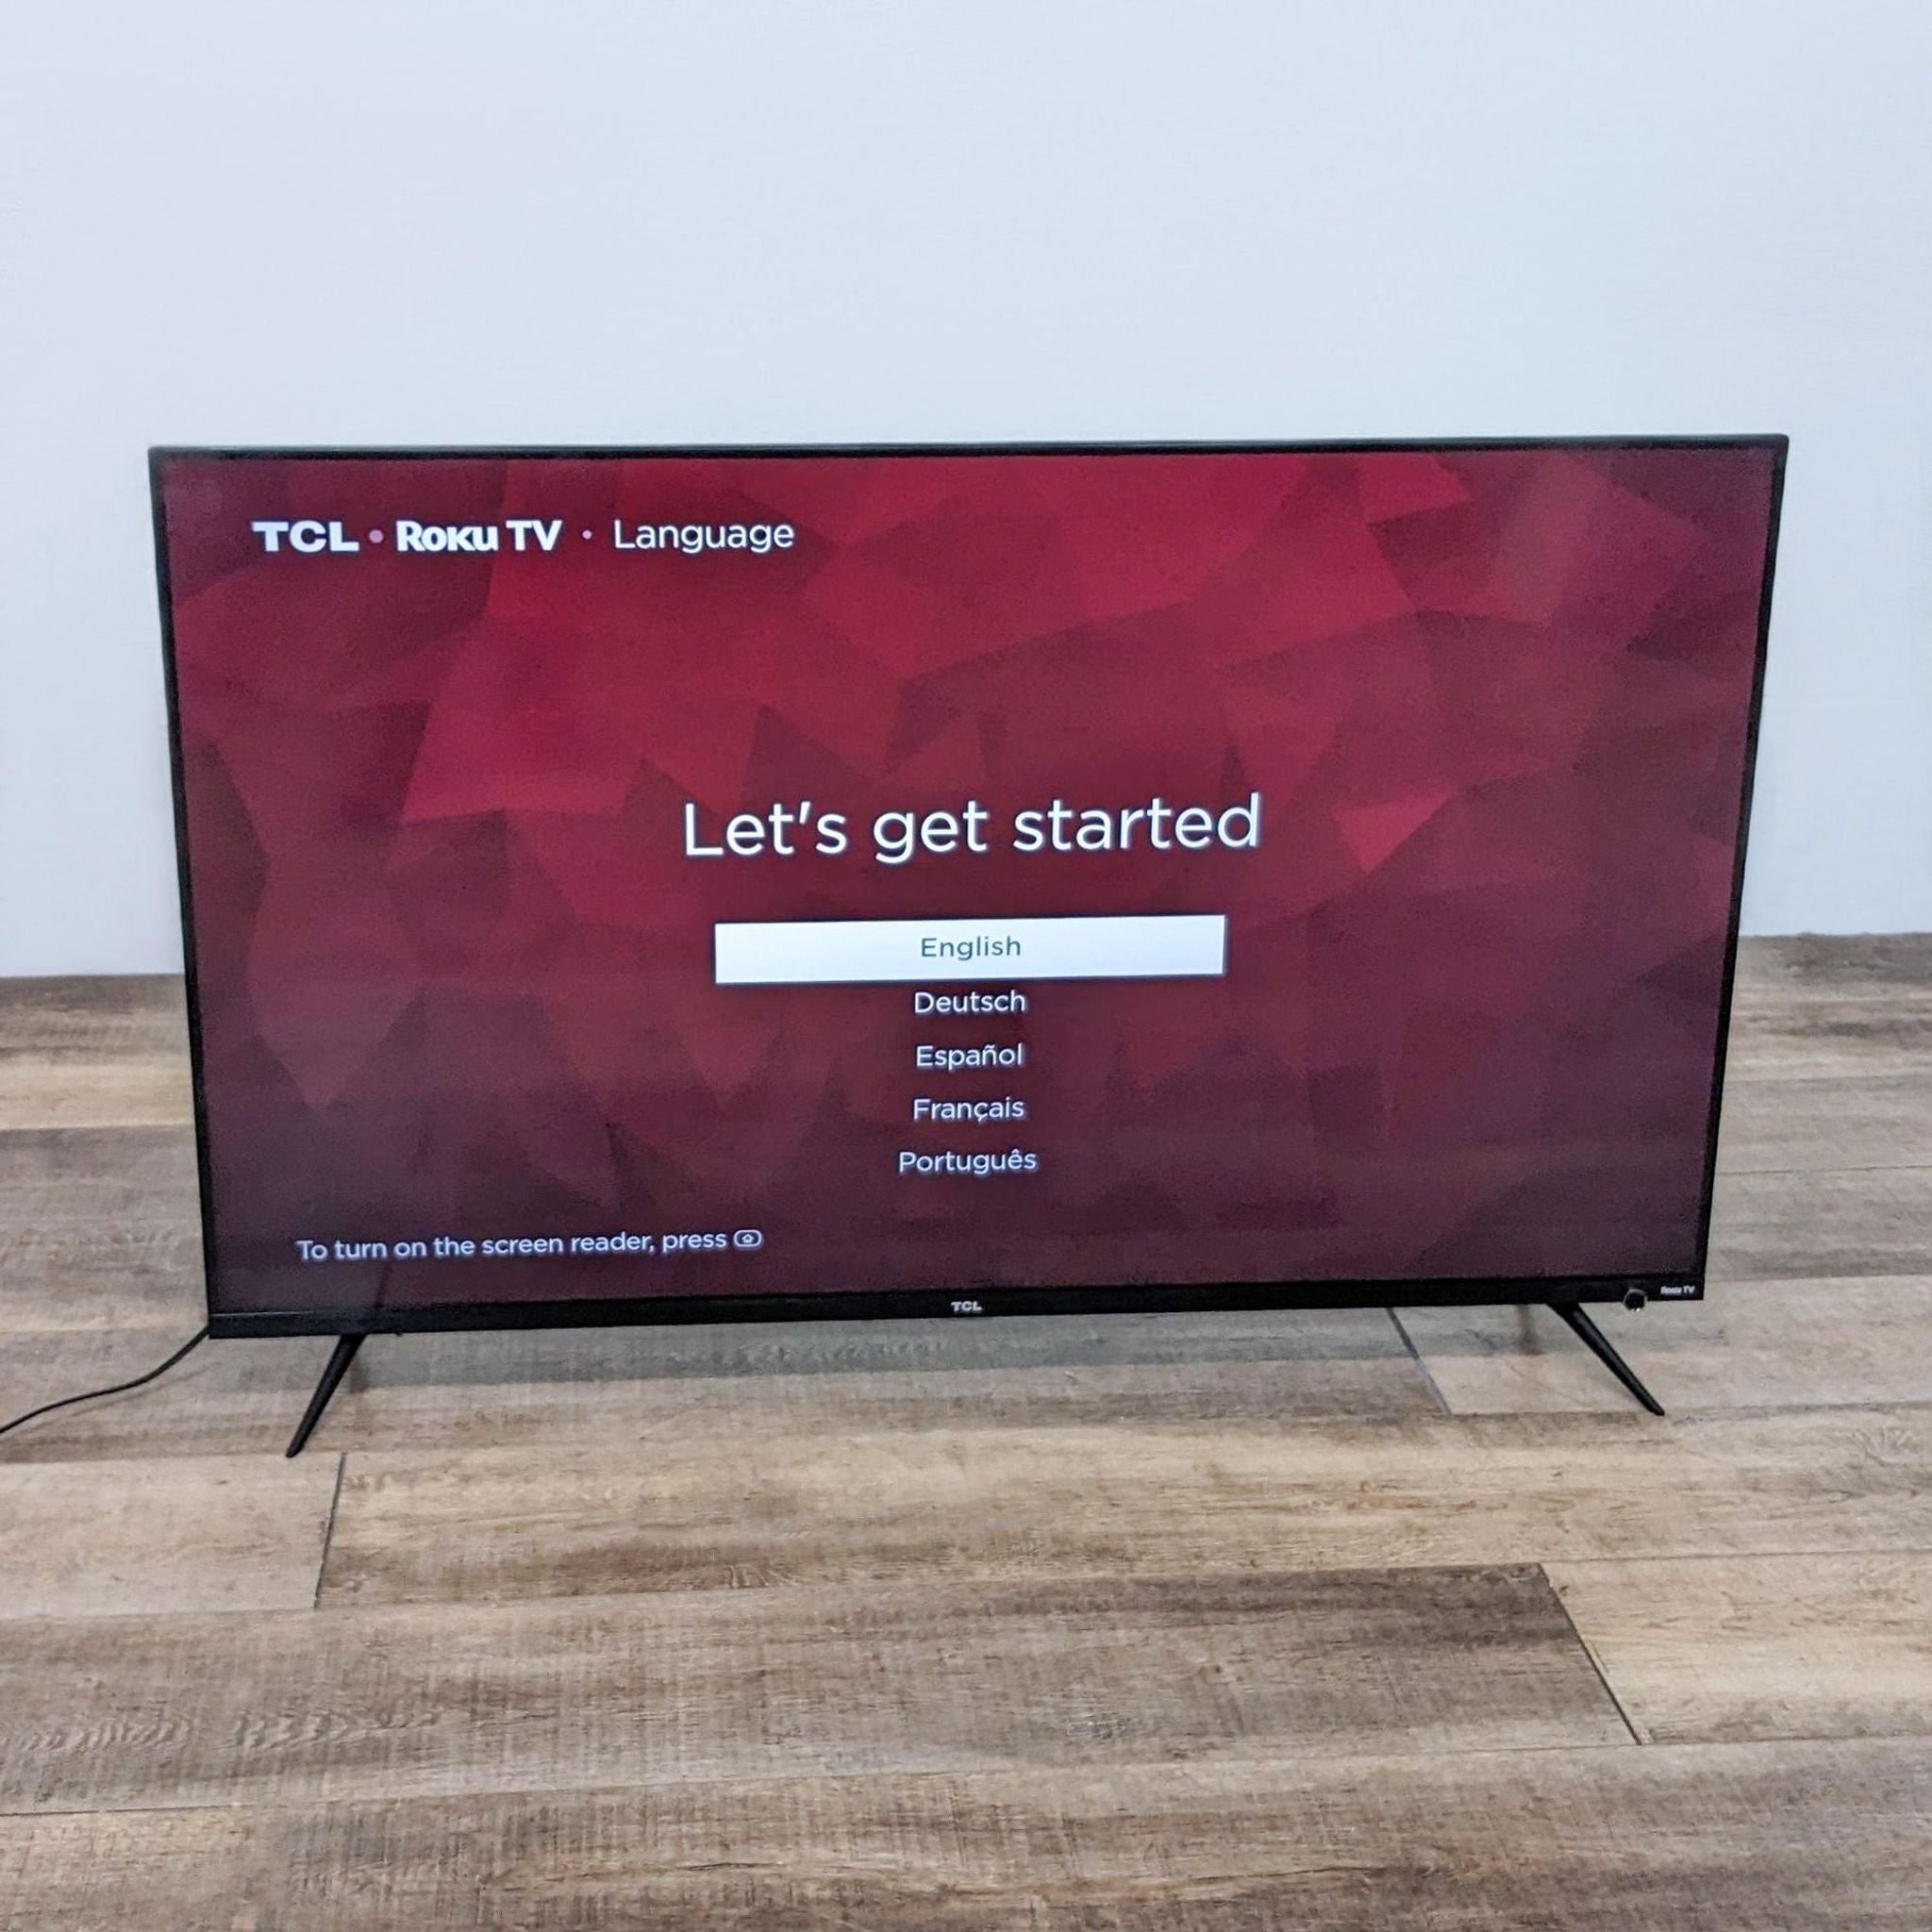 2. TCL 55S525 Roku TV powered on showing a "Let's get started" setup screen with language options, on a wooden floor.